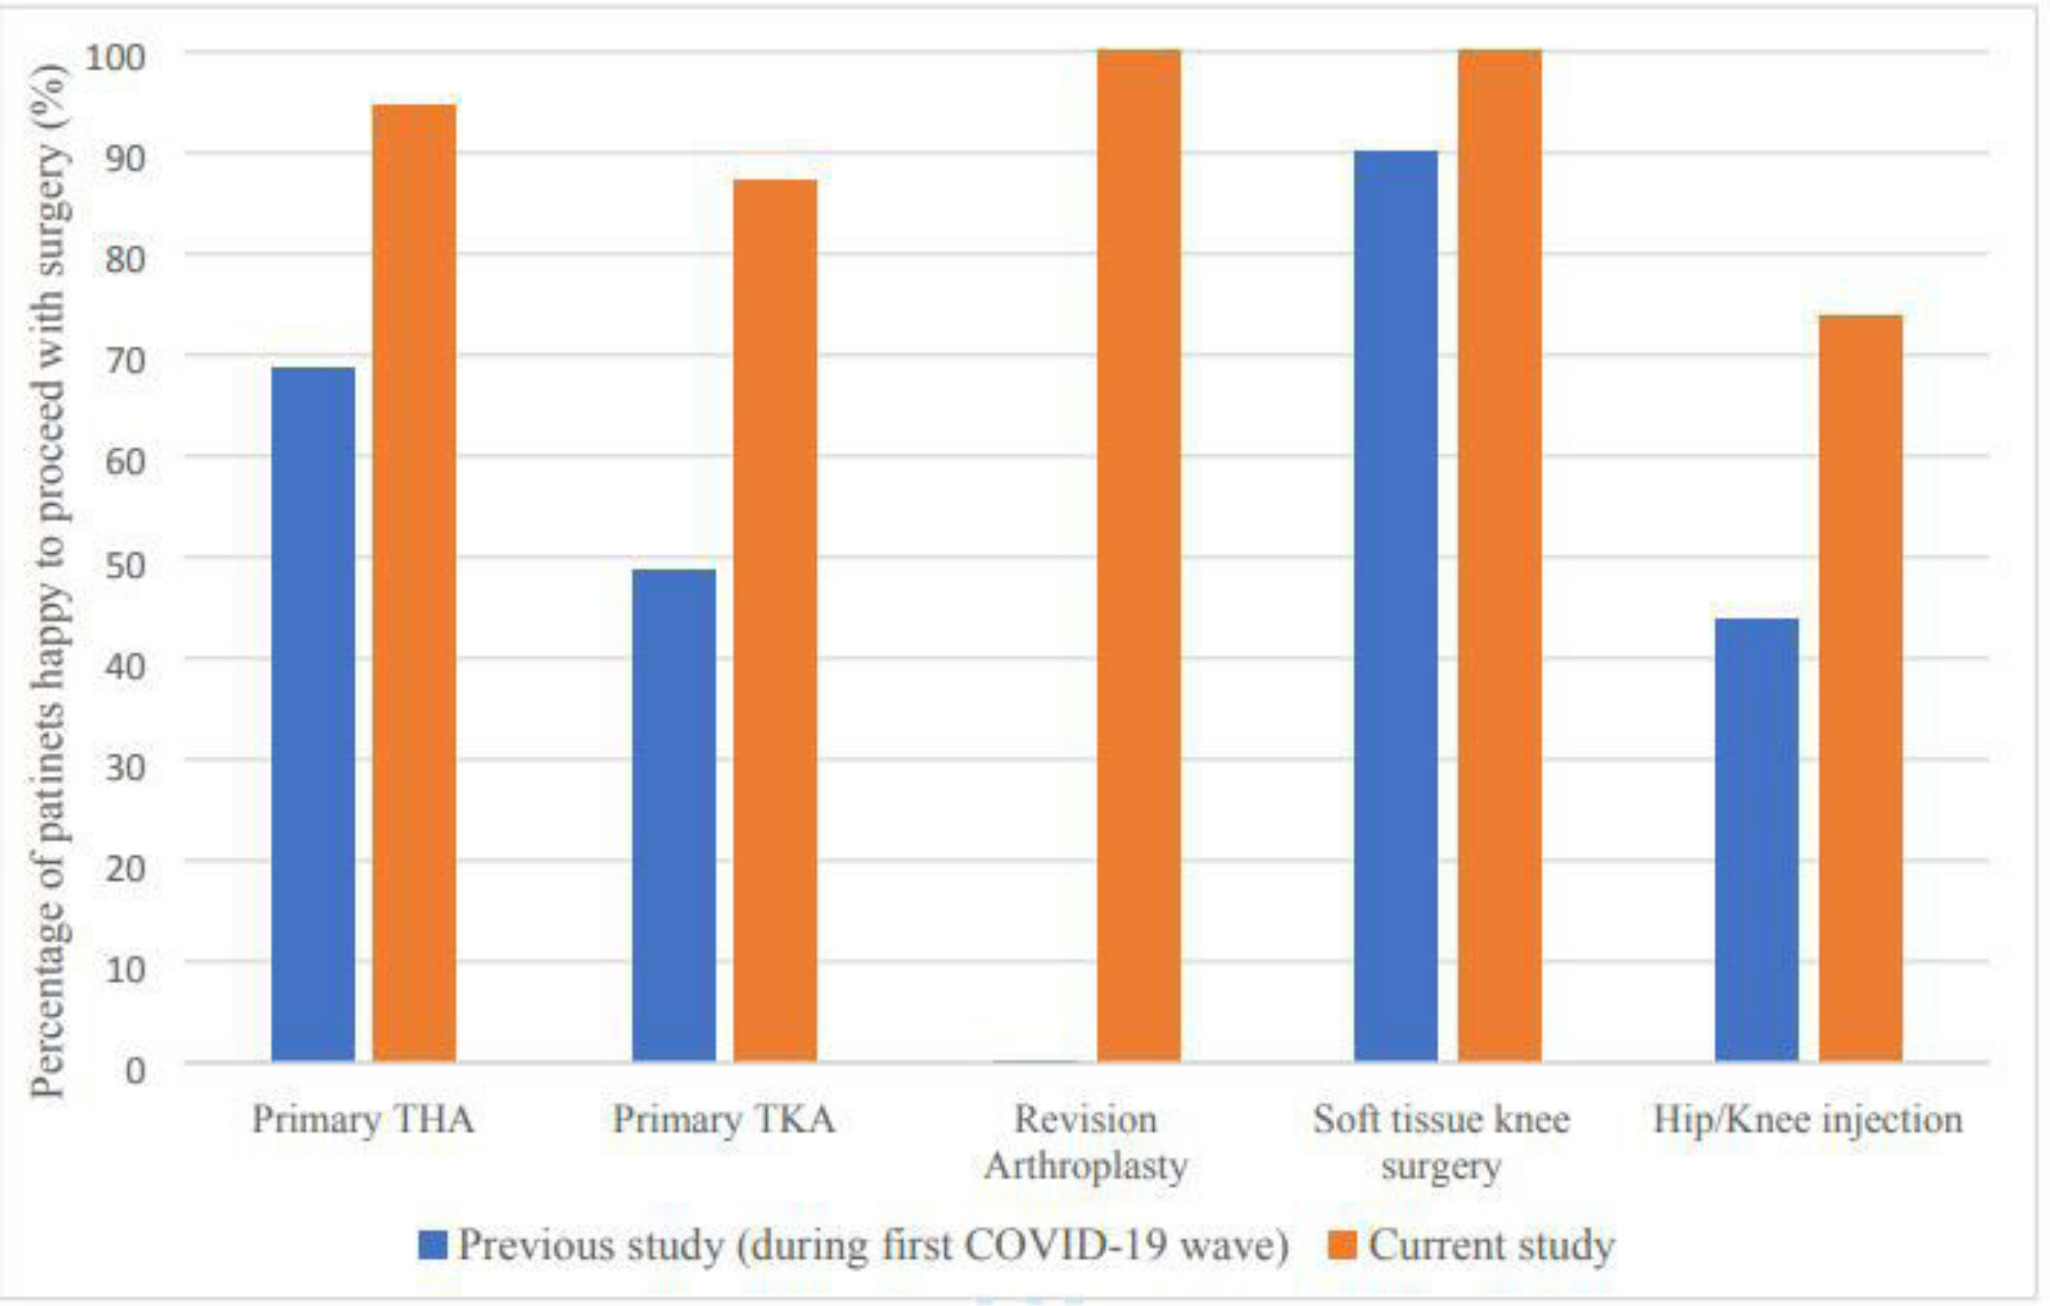 Fig. 1 
          Comparison in willingness to proceed with surgery within the different procedure subgroups between our previous study during the first COVID-19 wave and our current study.
        